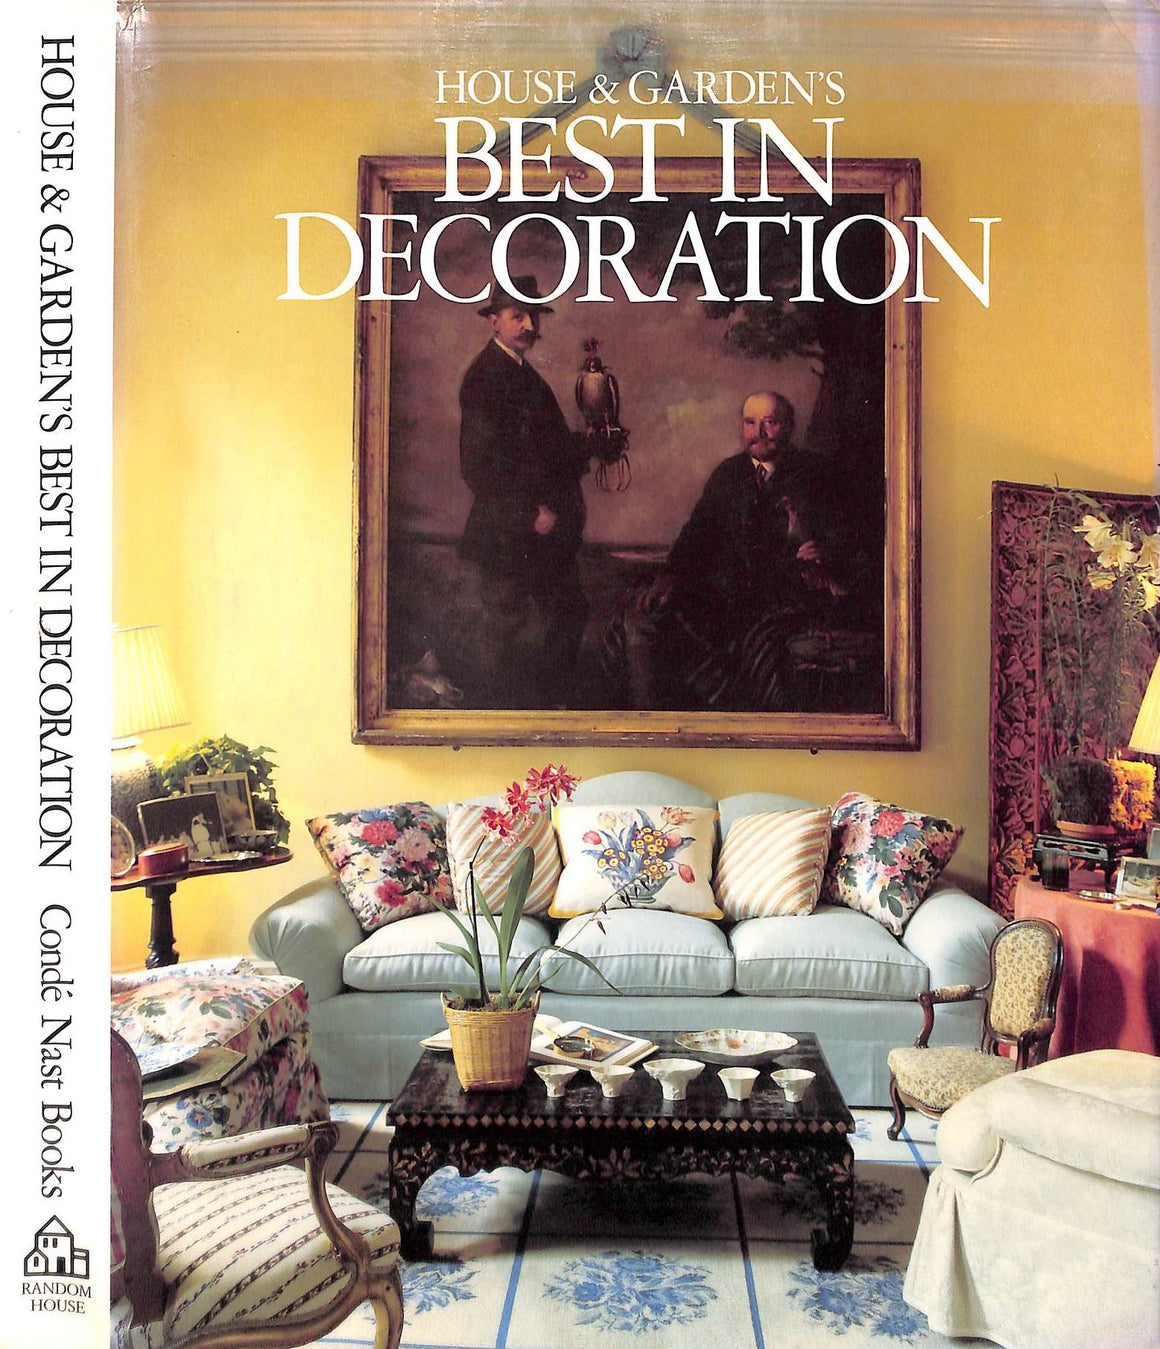 "House & Garden's Best In Decoration" 1987 The Editors of House & Garden